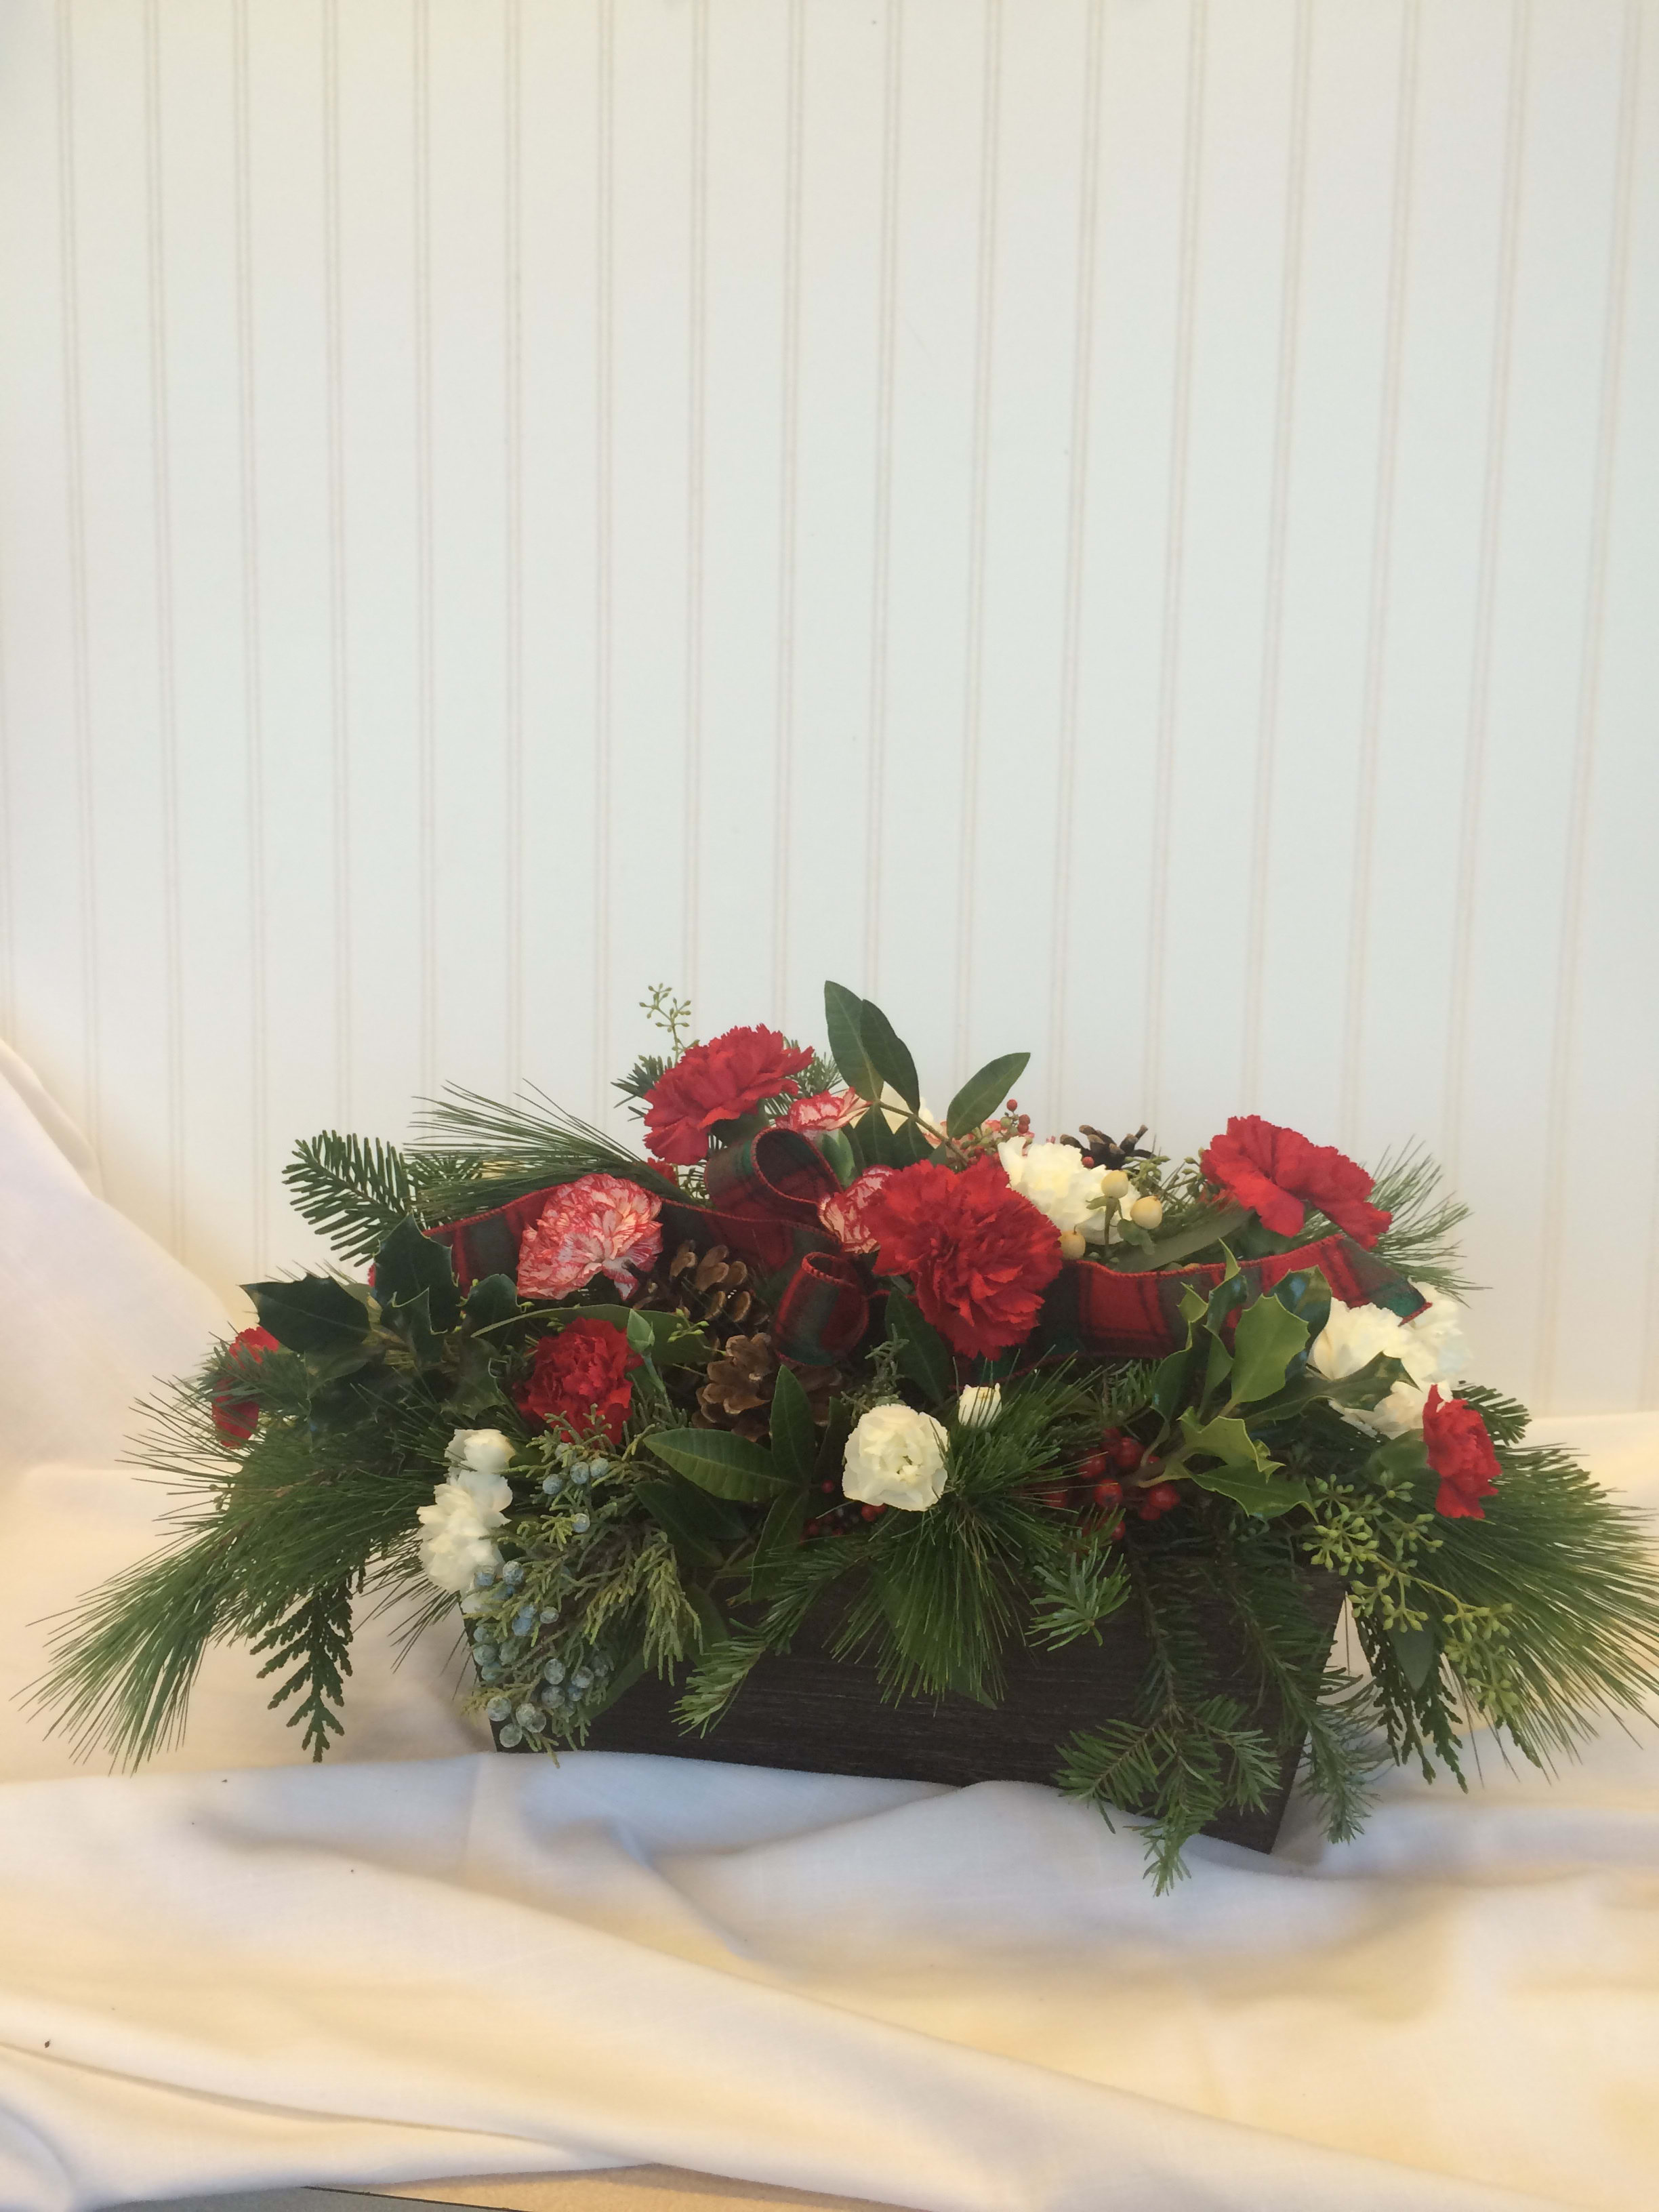 Holiday Centerpeice - A centerpiece of evergreens, red &amp; white carnations, pinecones &amp; ribbon designed in a wooden container for that nature lover. A more elegant container can be substituted with added silver or gold accents.